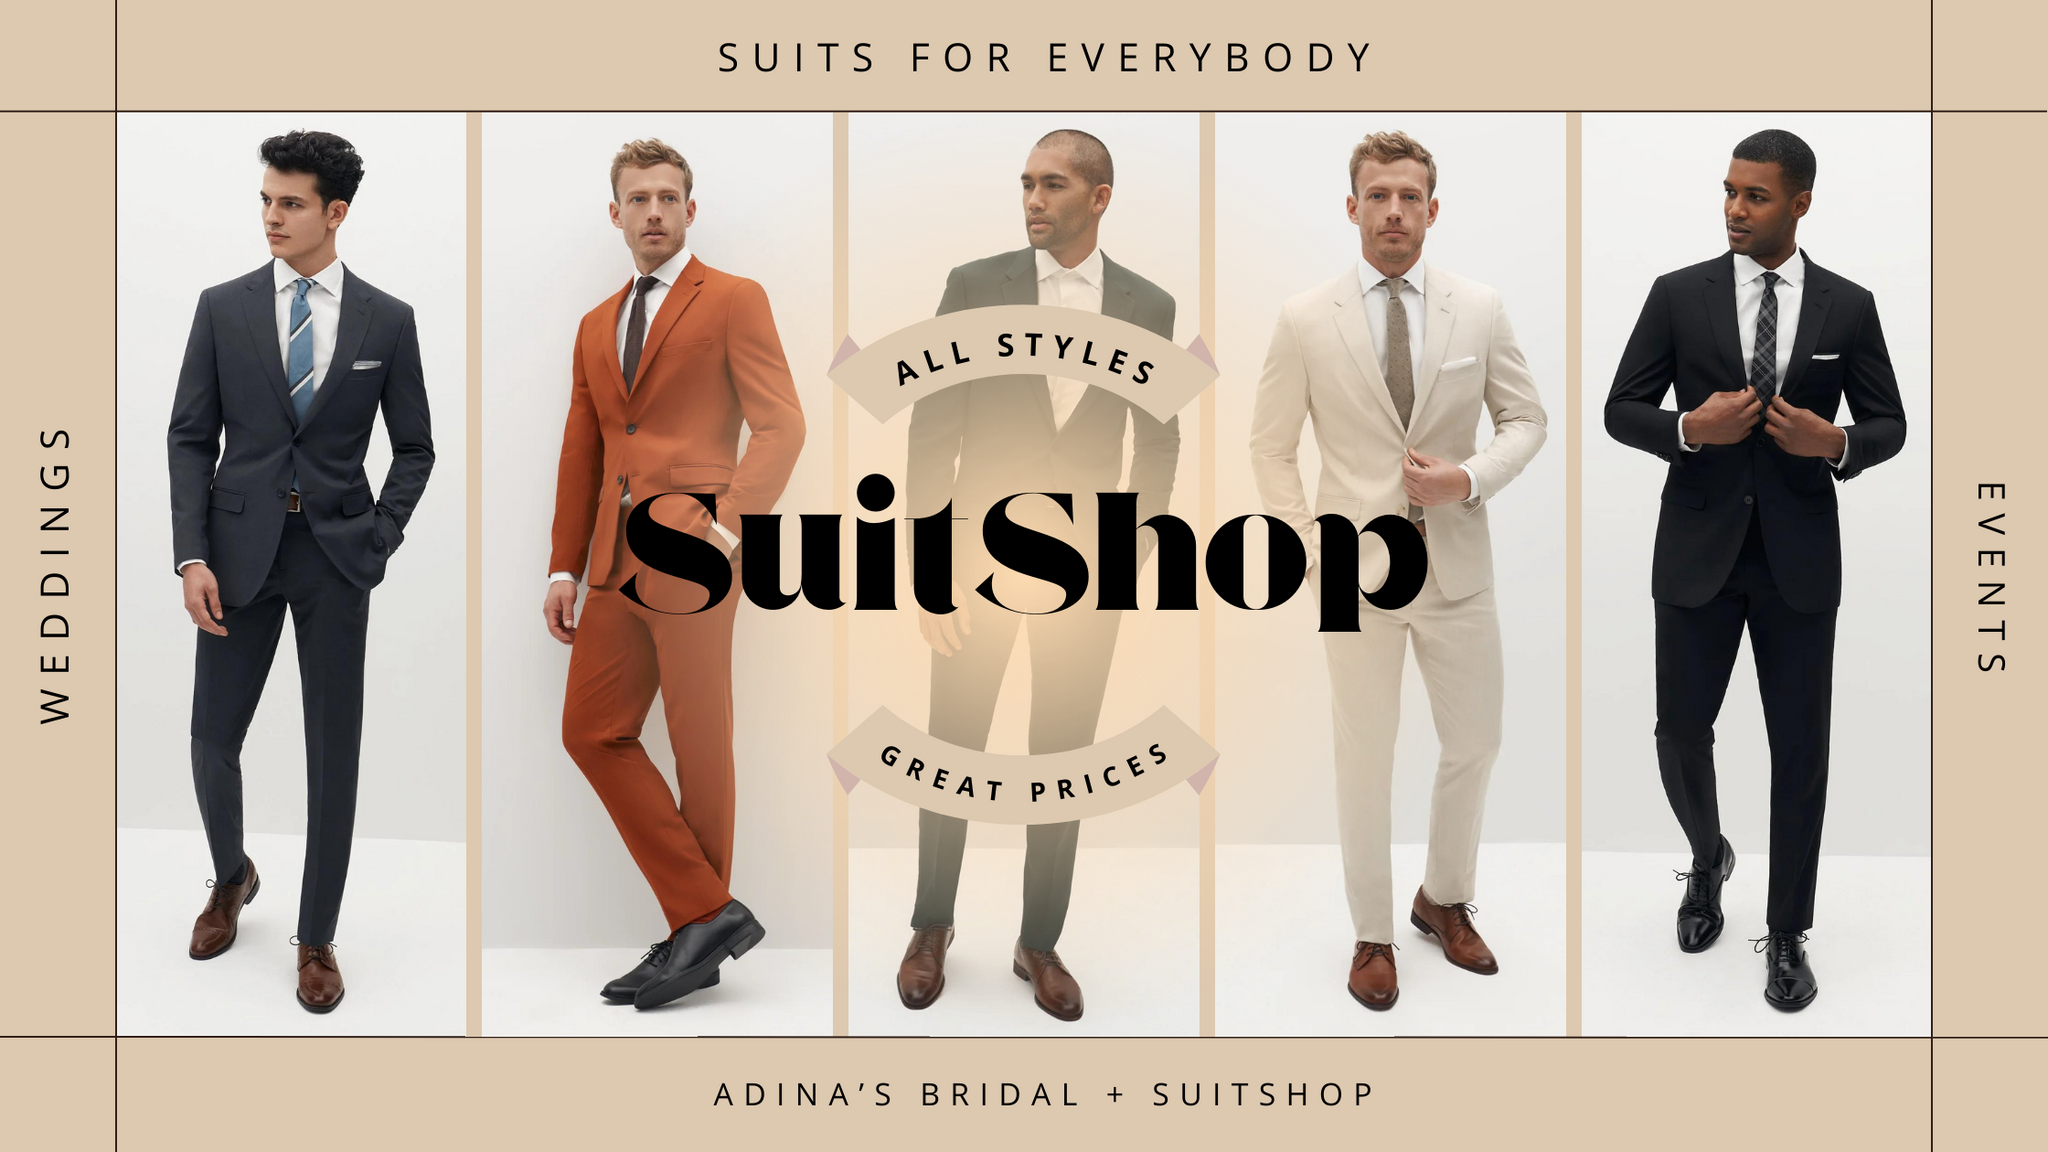 Wedding Suits for the Whole Group